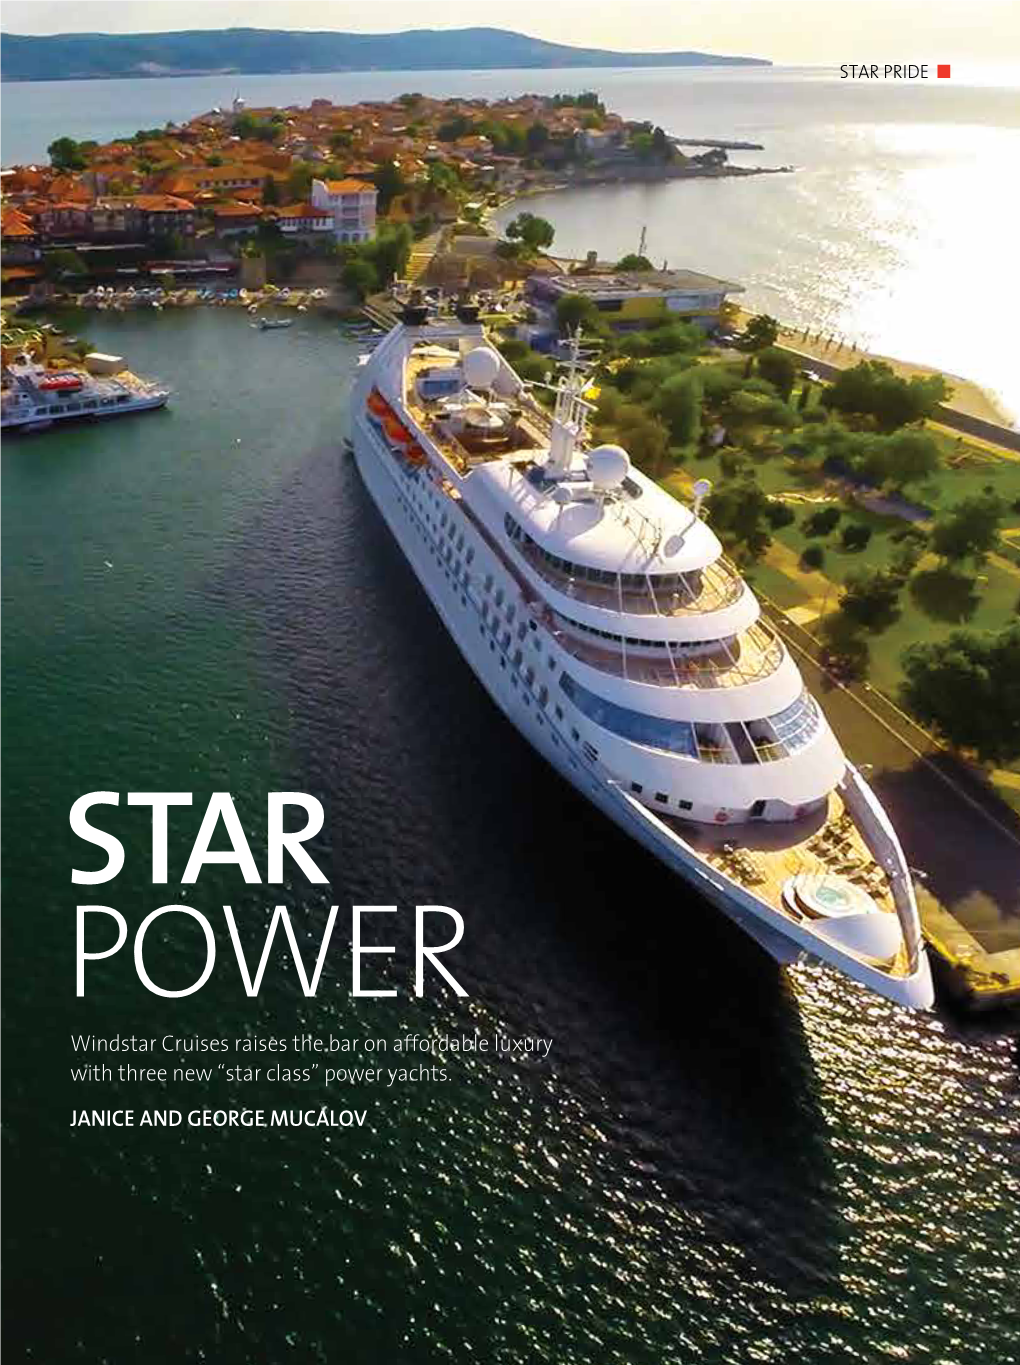 Windstar Cruises Raises the Bar on Affordable Luxury with Three New “Star Class” Power Yachts